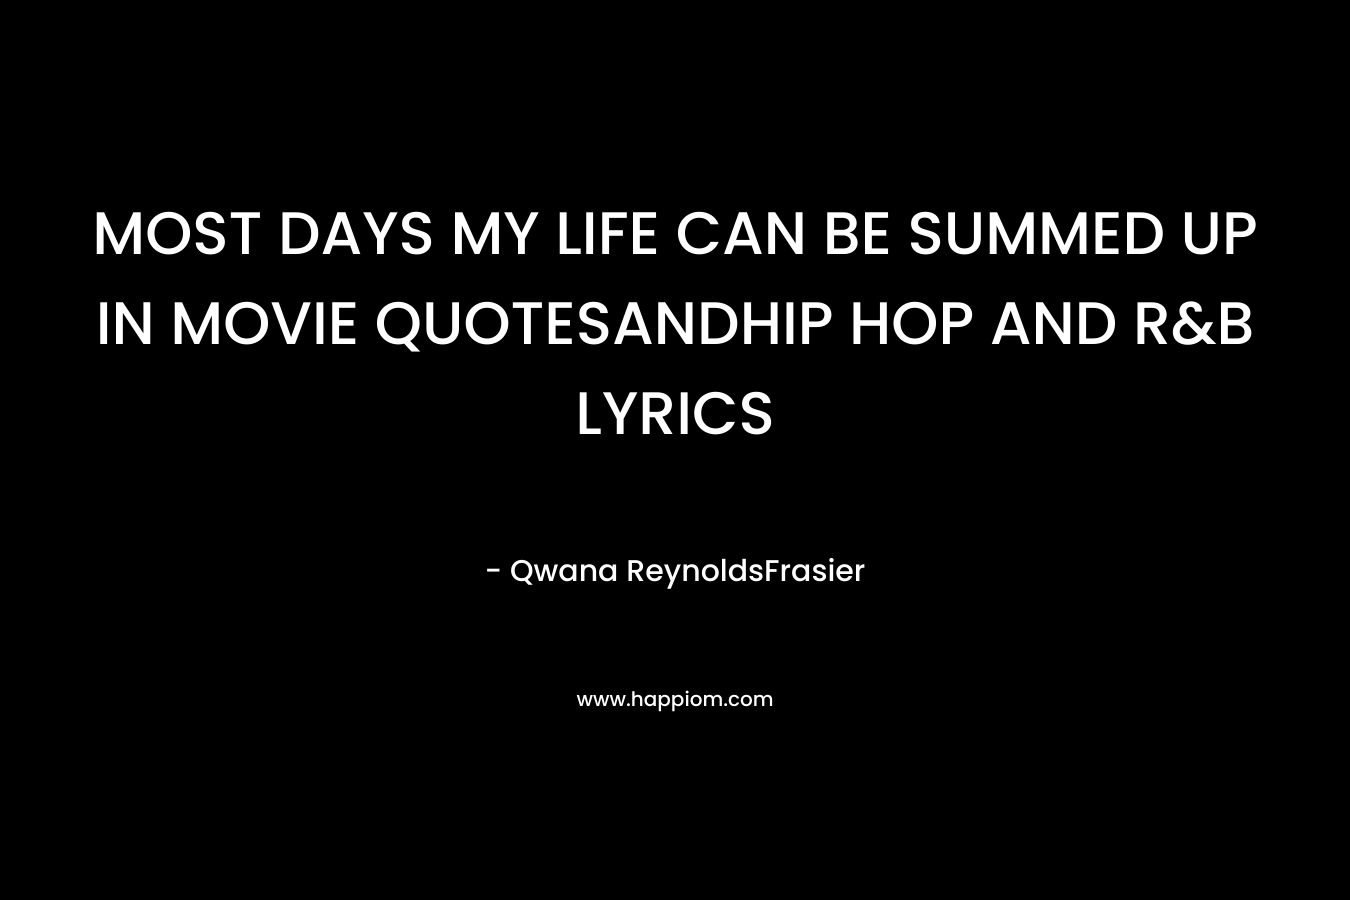 MOST DAYS MY LIFE CAN BE SUMMED UP IN MOVIE QUOTESANDHIP HOP AND R&B LYRICS – Qwana ReynoldsFrasier